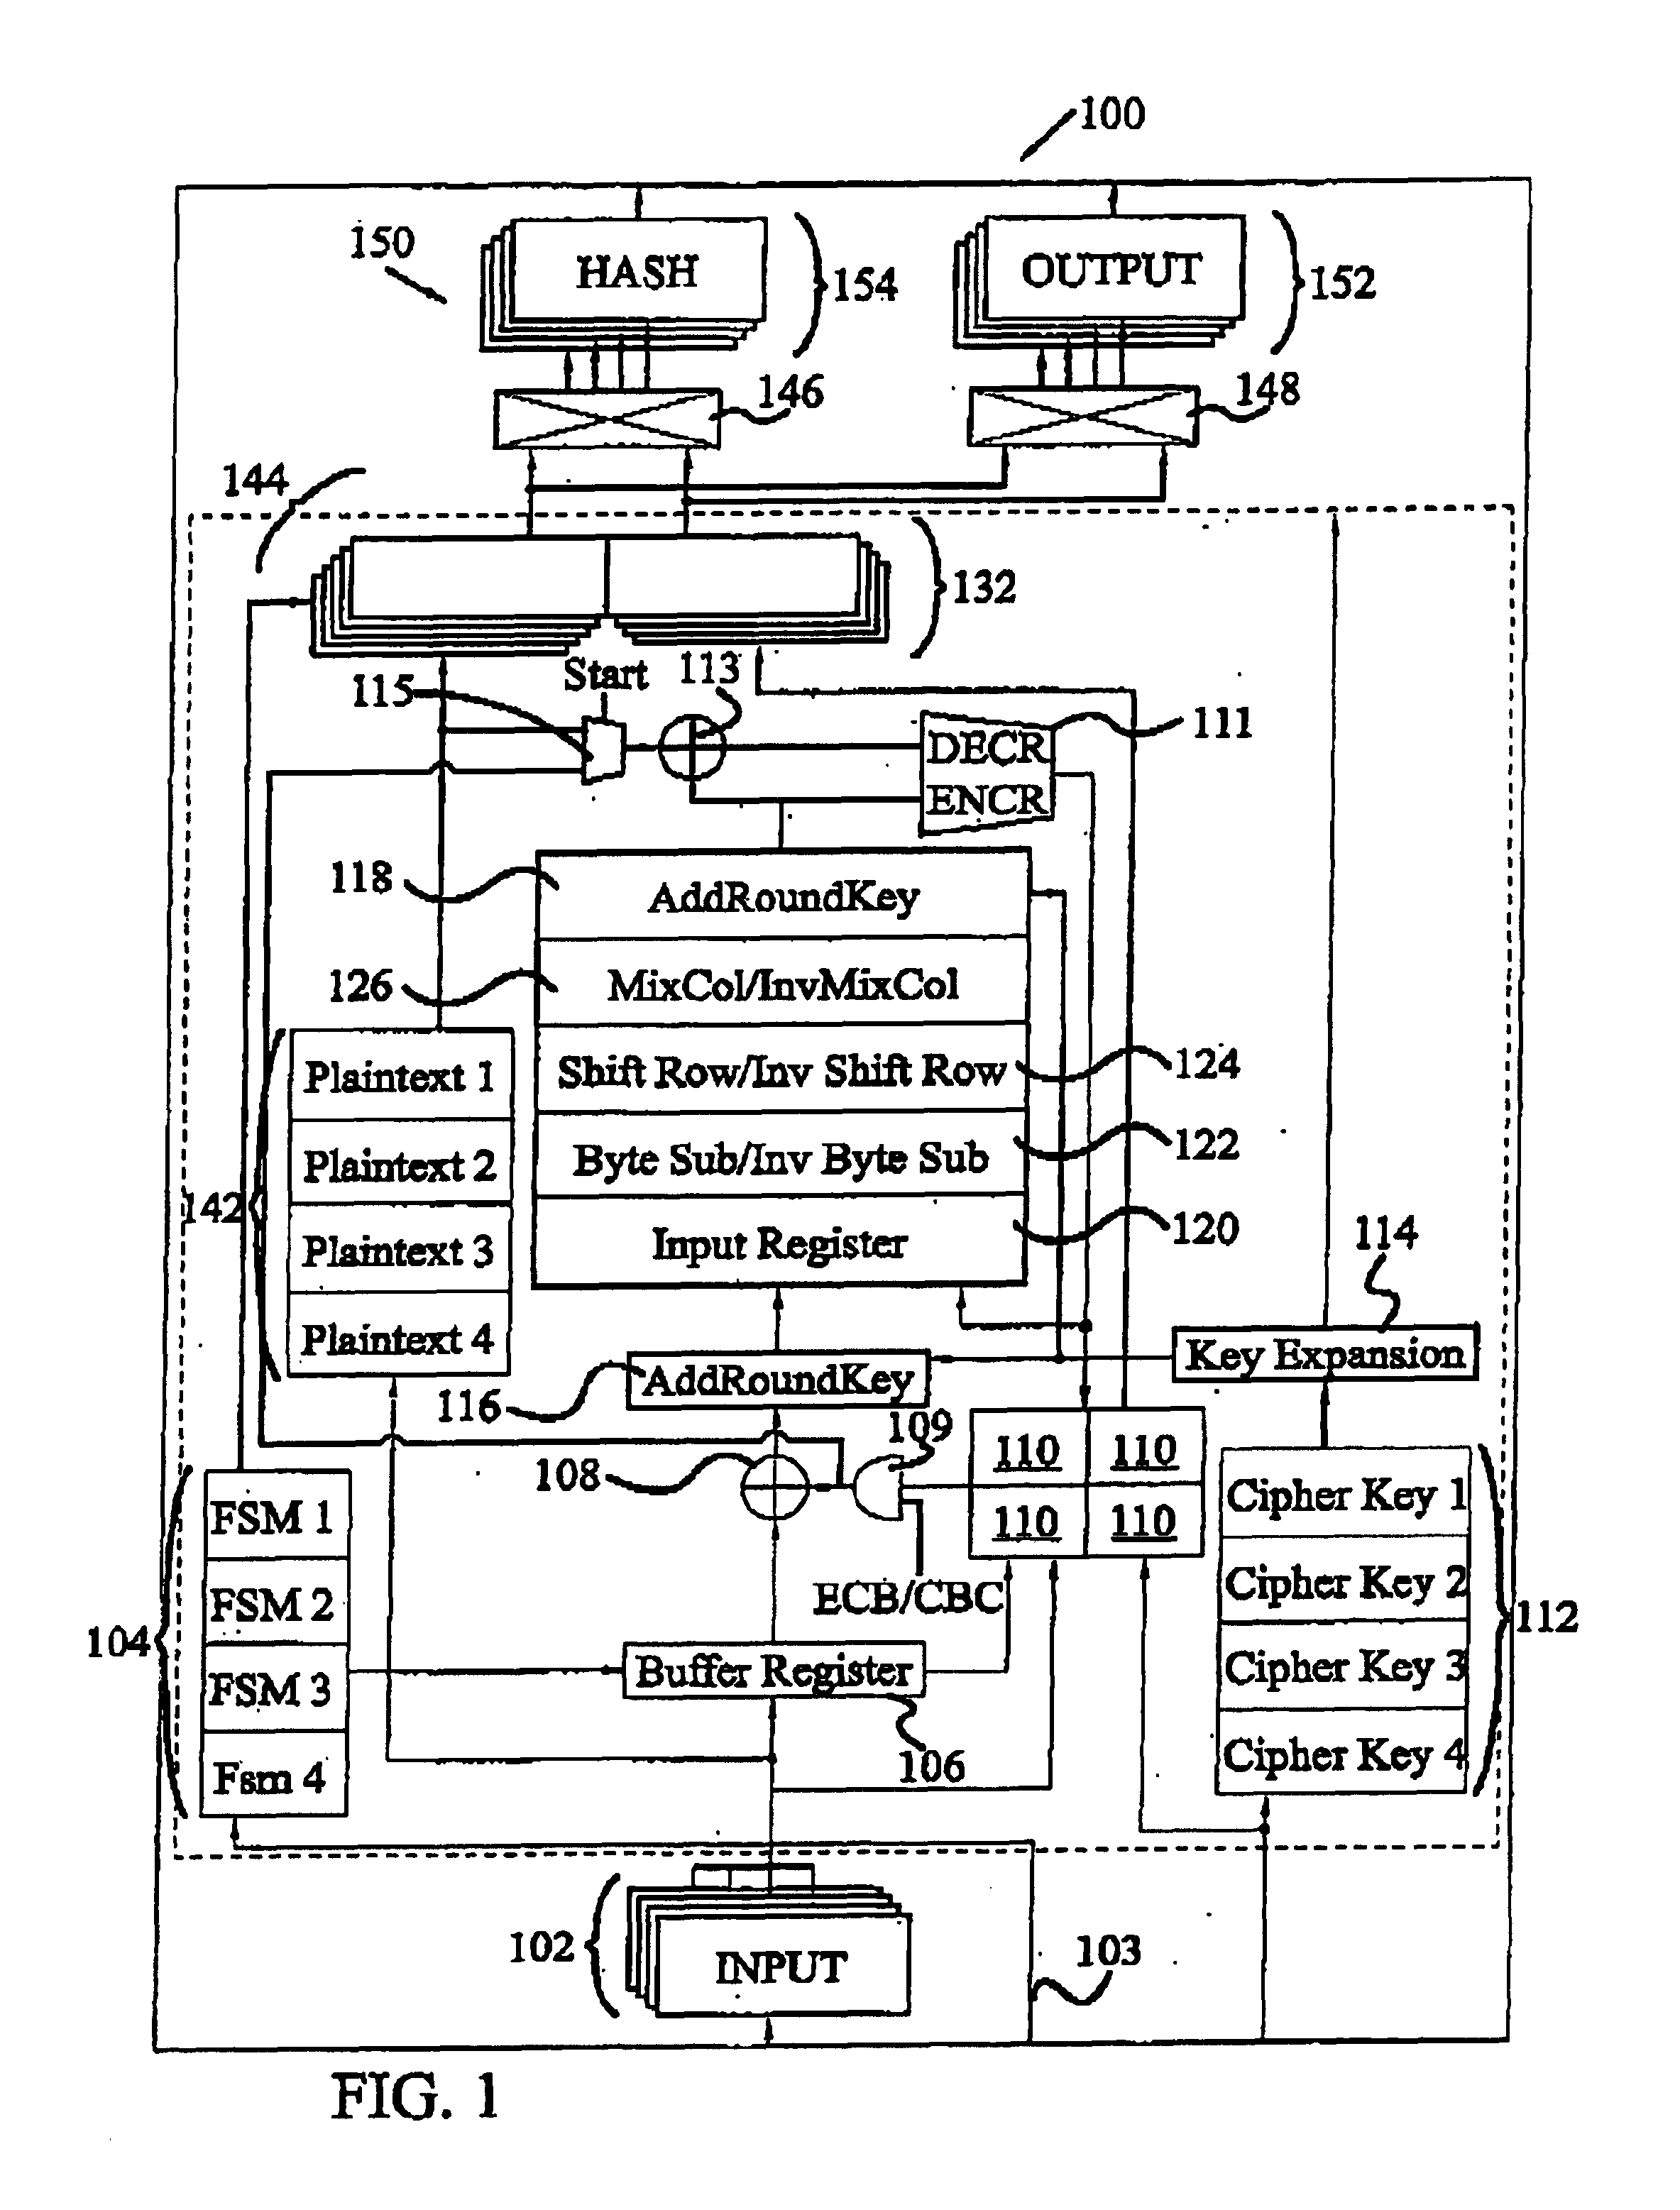 Circuit and method for implementing the advanced encryption standard block cipher algorithm in a system having a plurality of channels